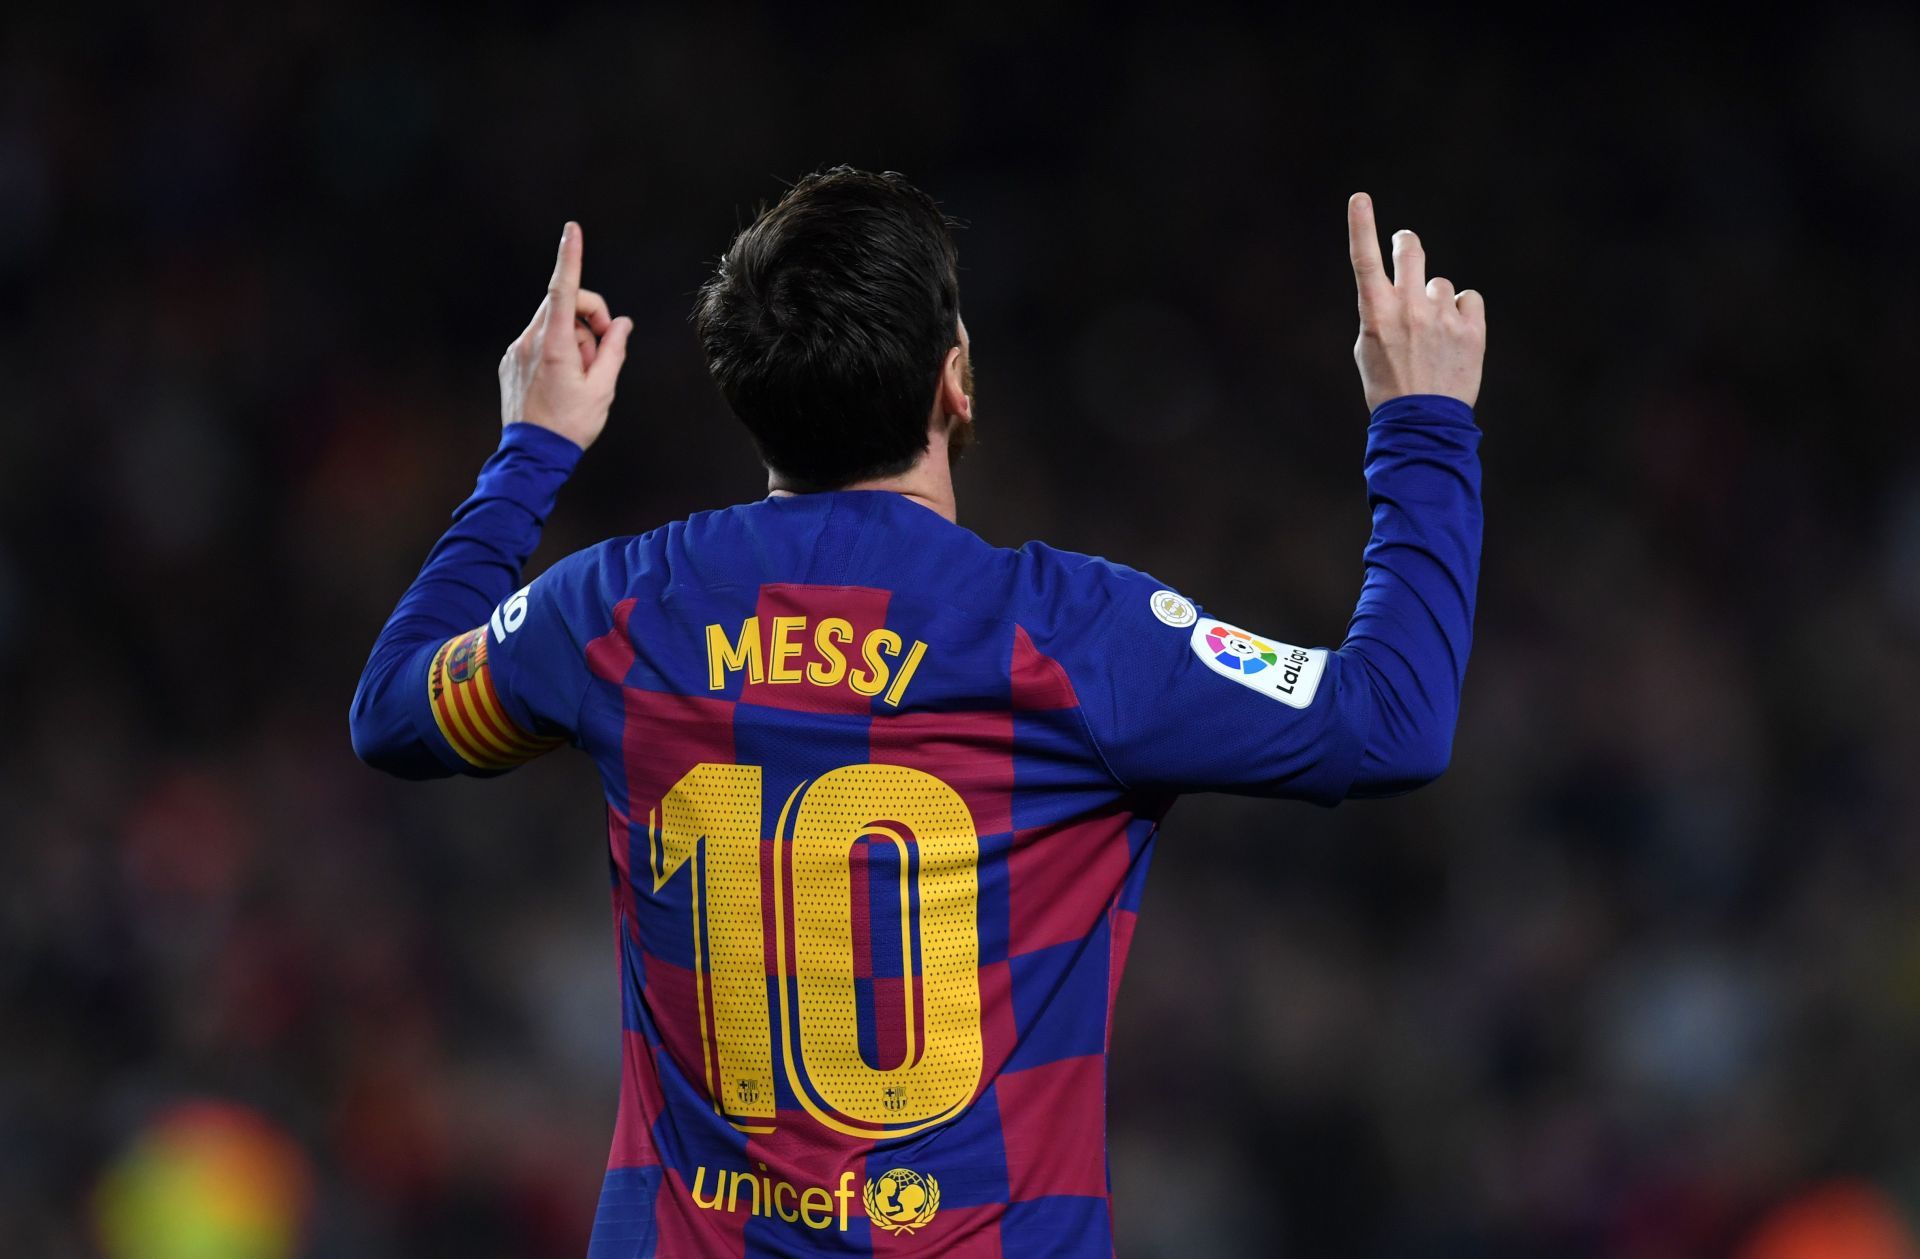 Lionel Messi has finished as top-scorer in a La Liga season more than any other player